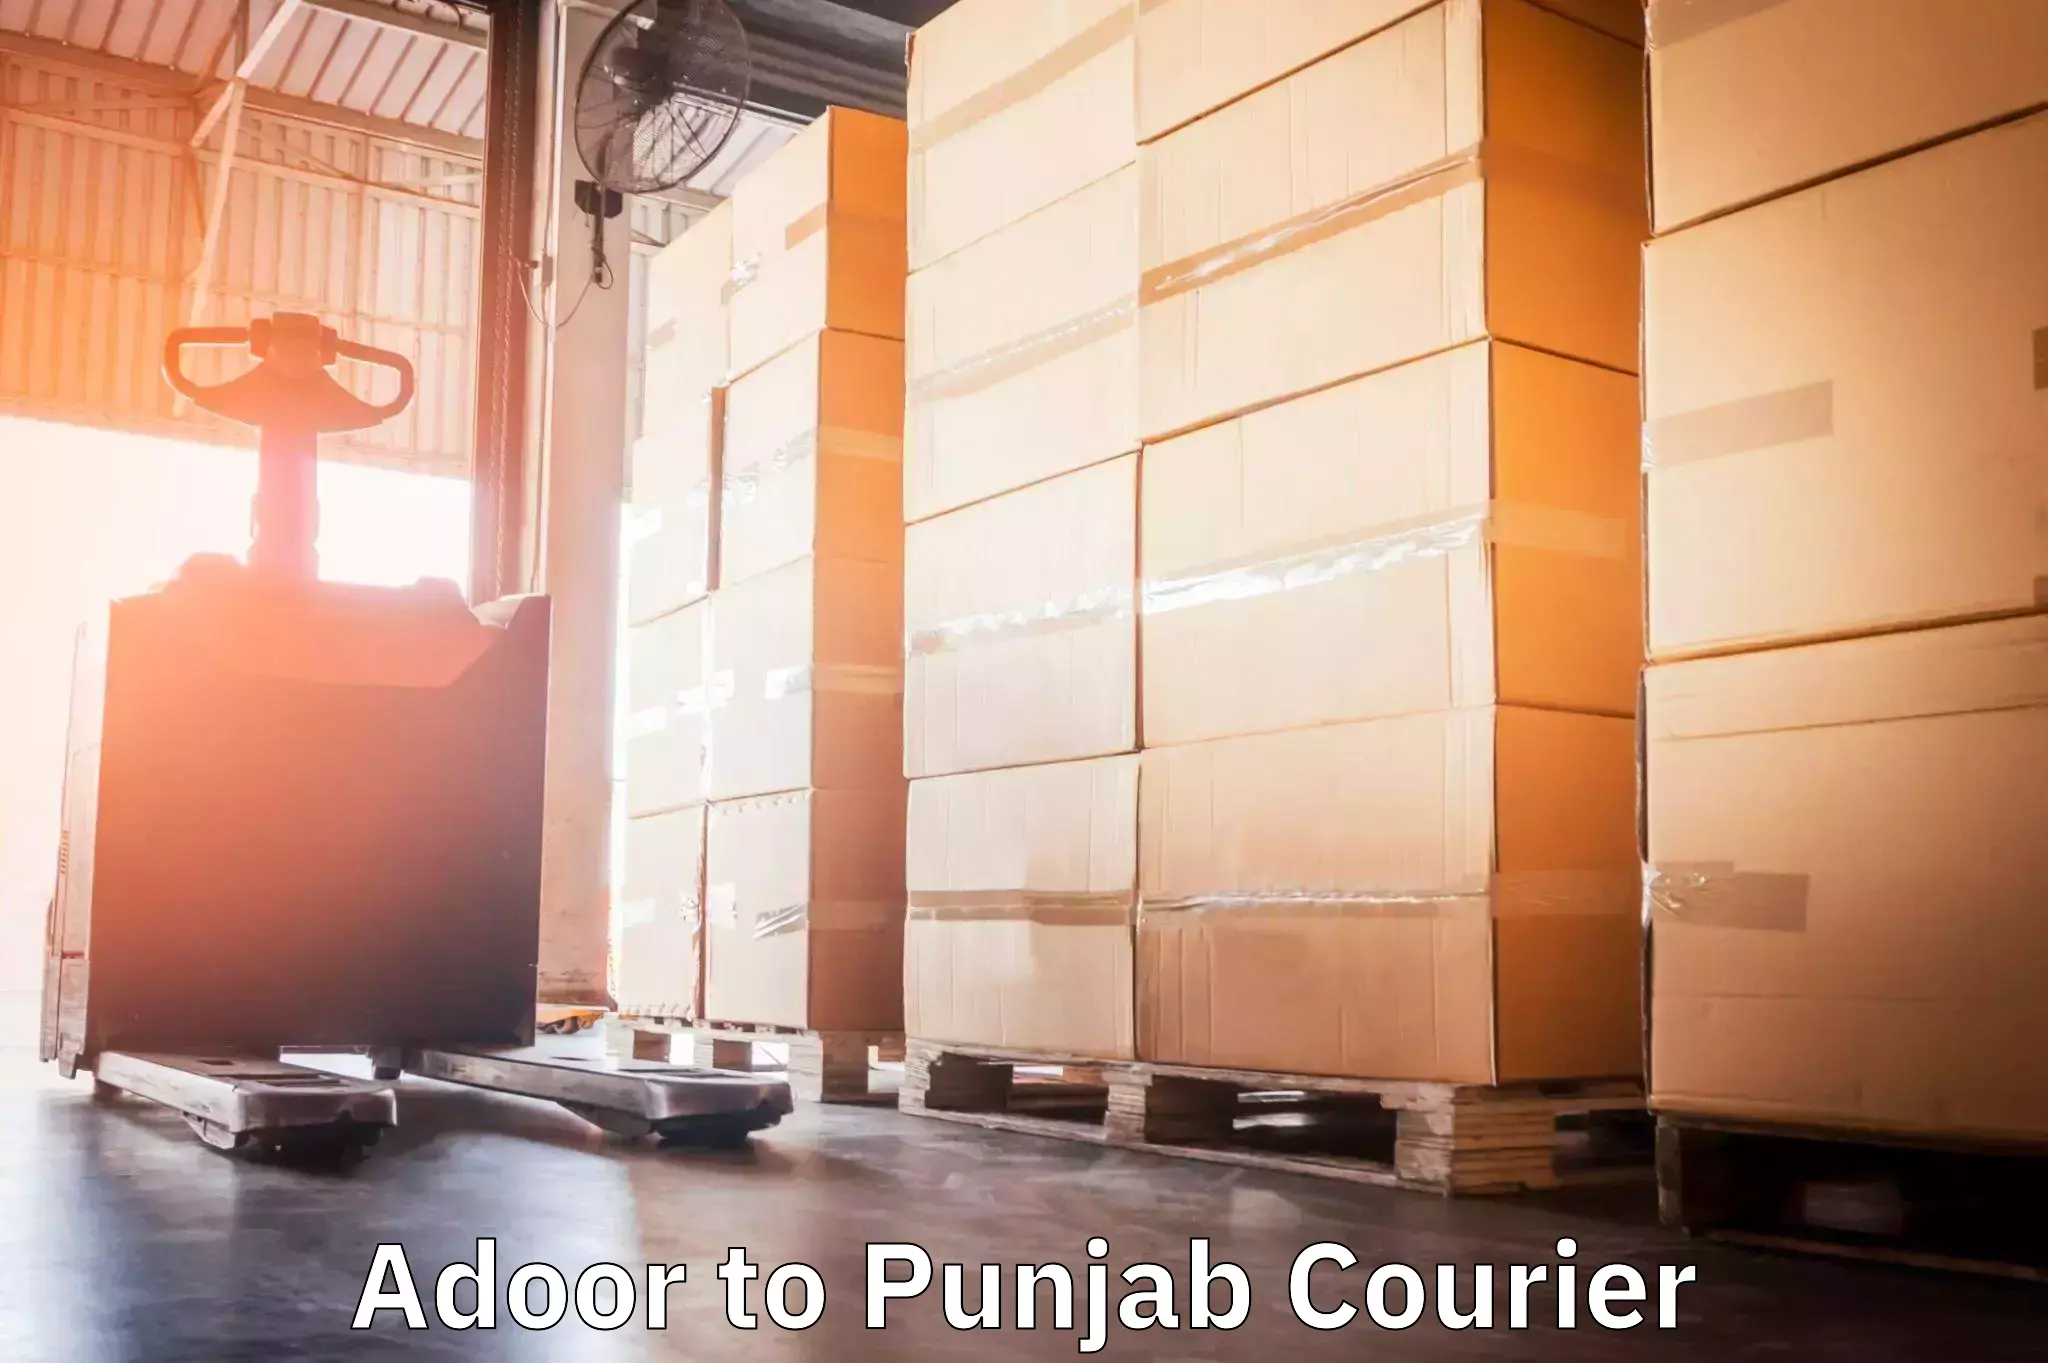 Business courier solutions Adoor to Mohali